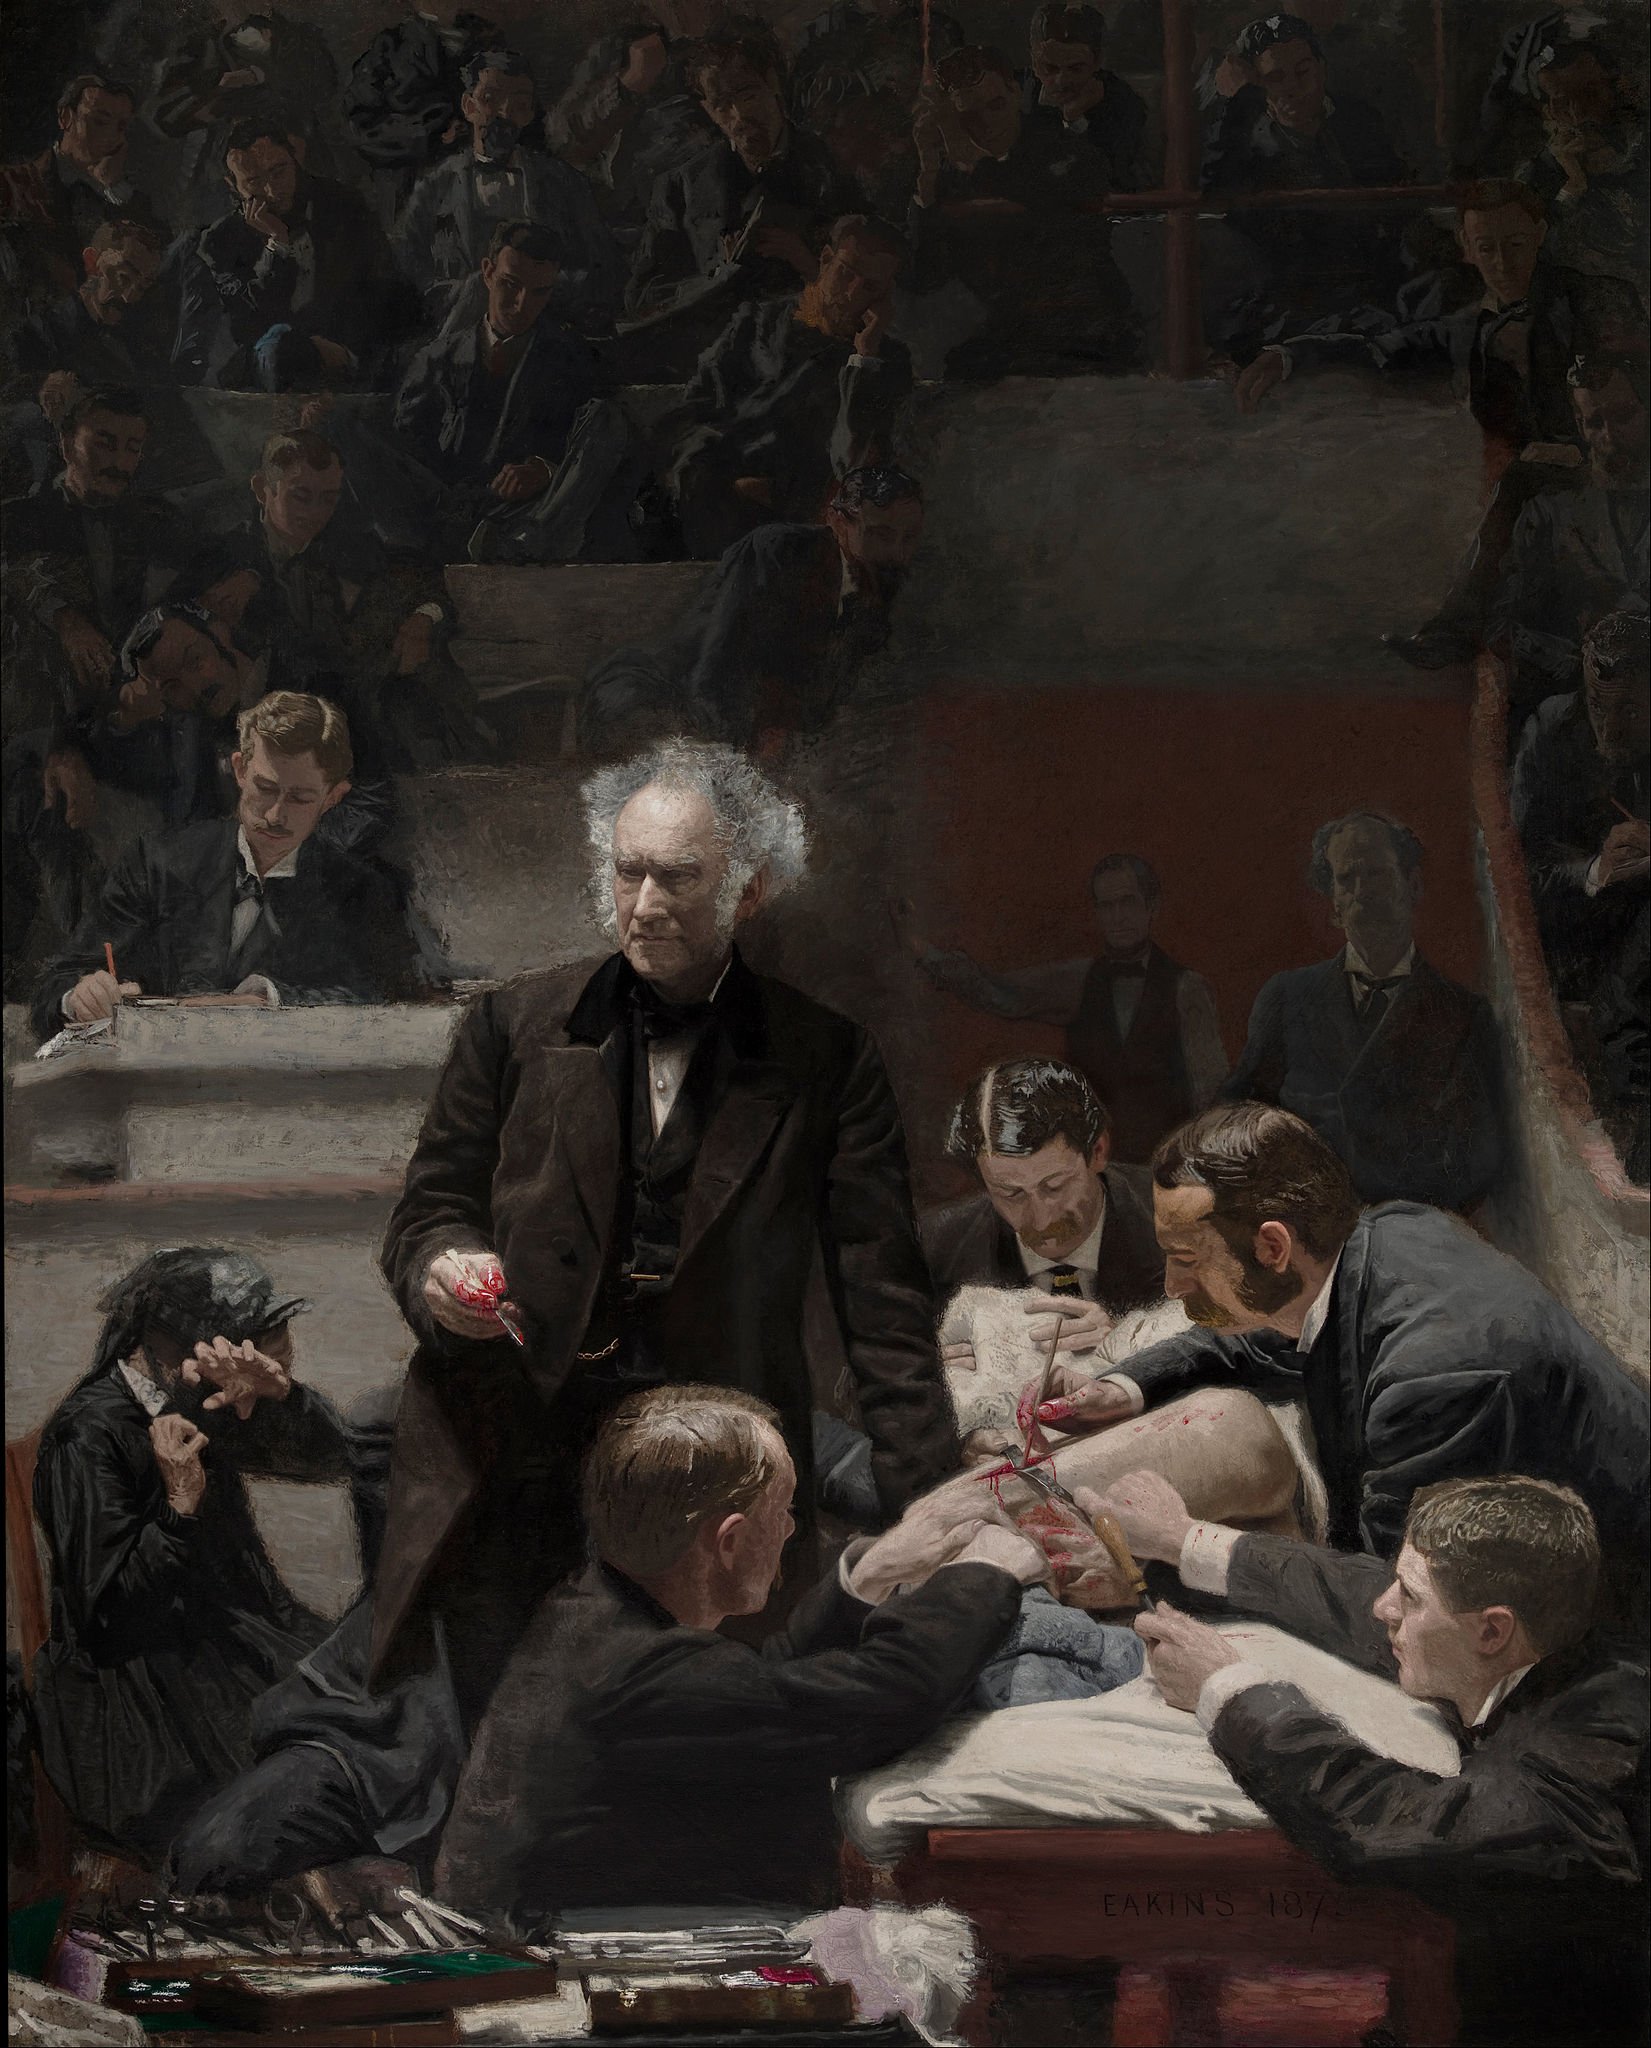 19th century oil painting showing a surgical scene in a well-lit amphitheater. The central figure is Dr. Samuel Gross, dressed in street attire instead of surgical garb, dramatically gesturing while holding a blood-stained scalpel. He is surrounded by other doctors observing and assisting the operation on a reclined and partially obscured patient. To the left, a woman recoils in horror, hiding her face. On the right, a young man (the artist) calmly sketches the scene.